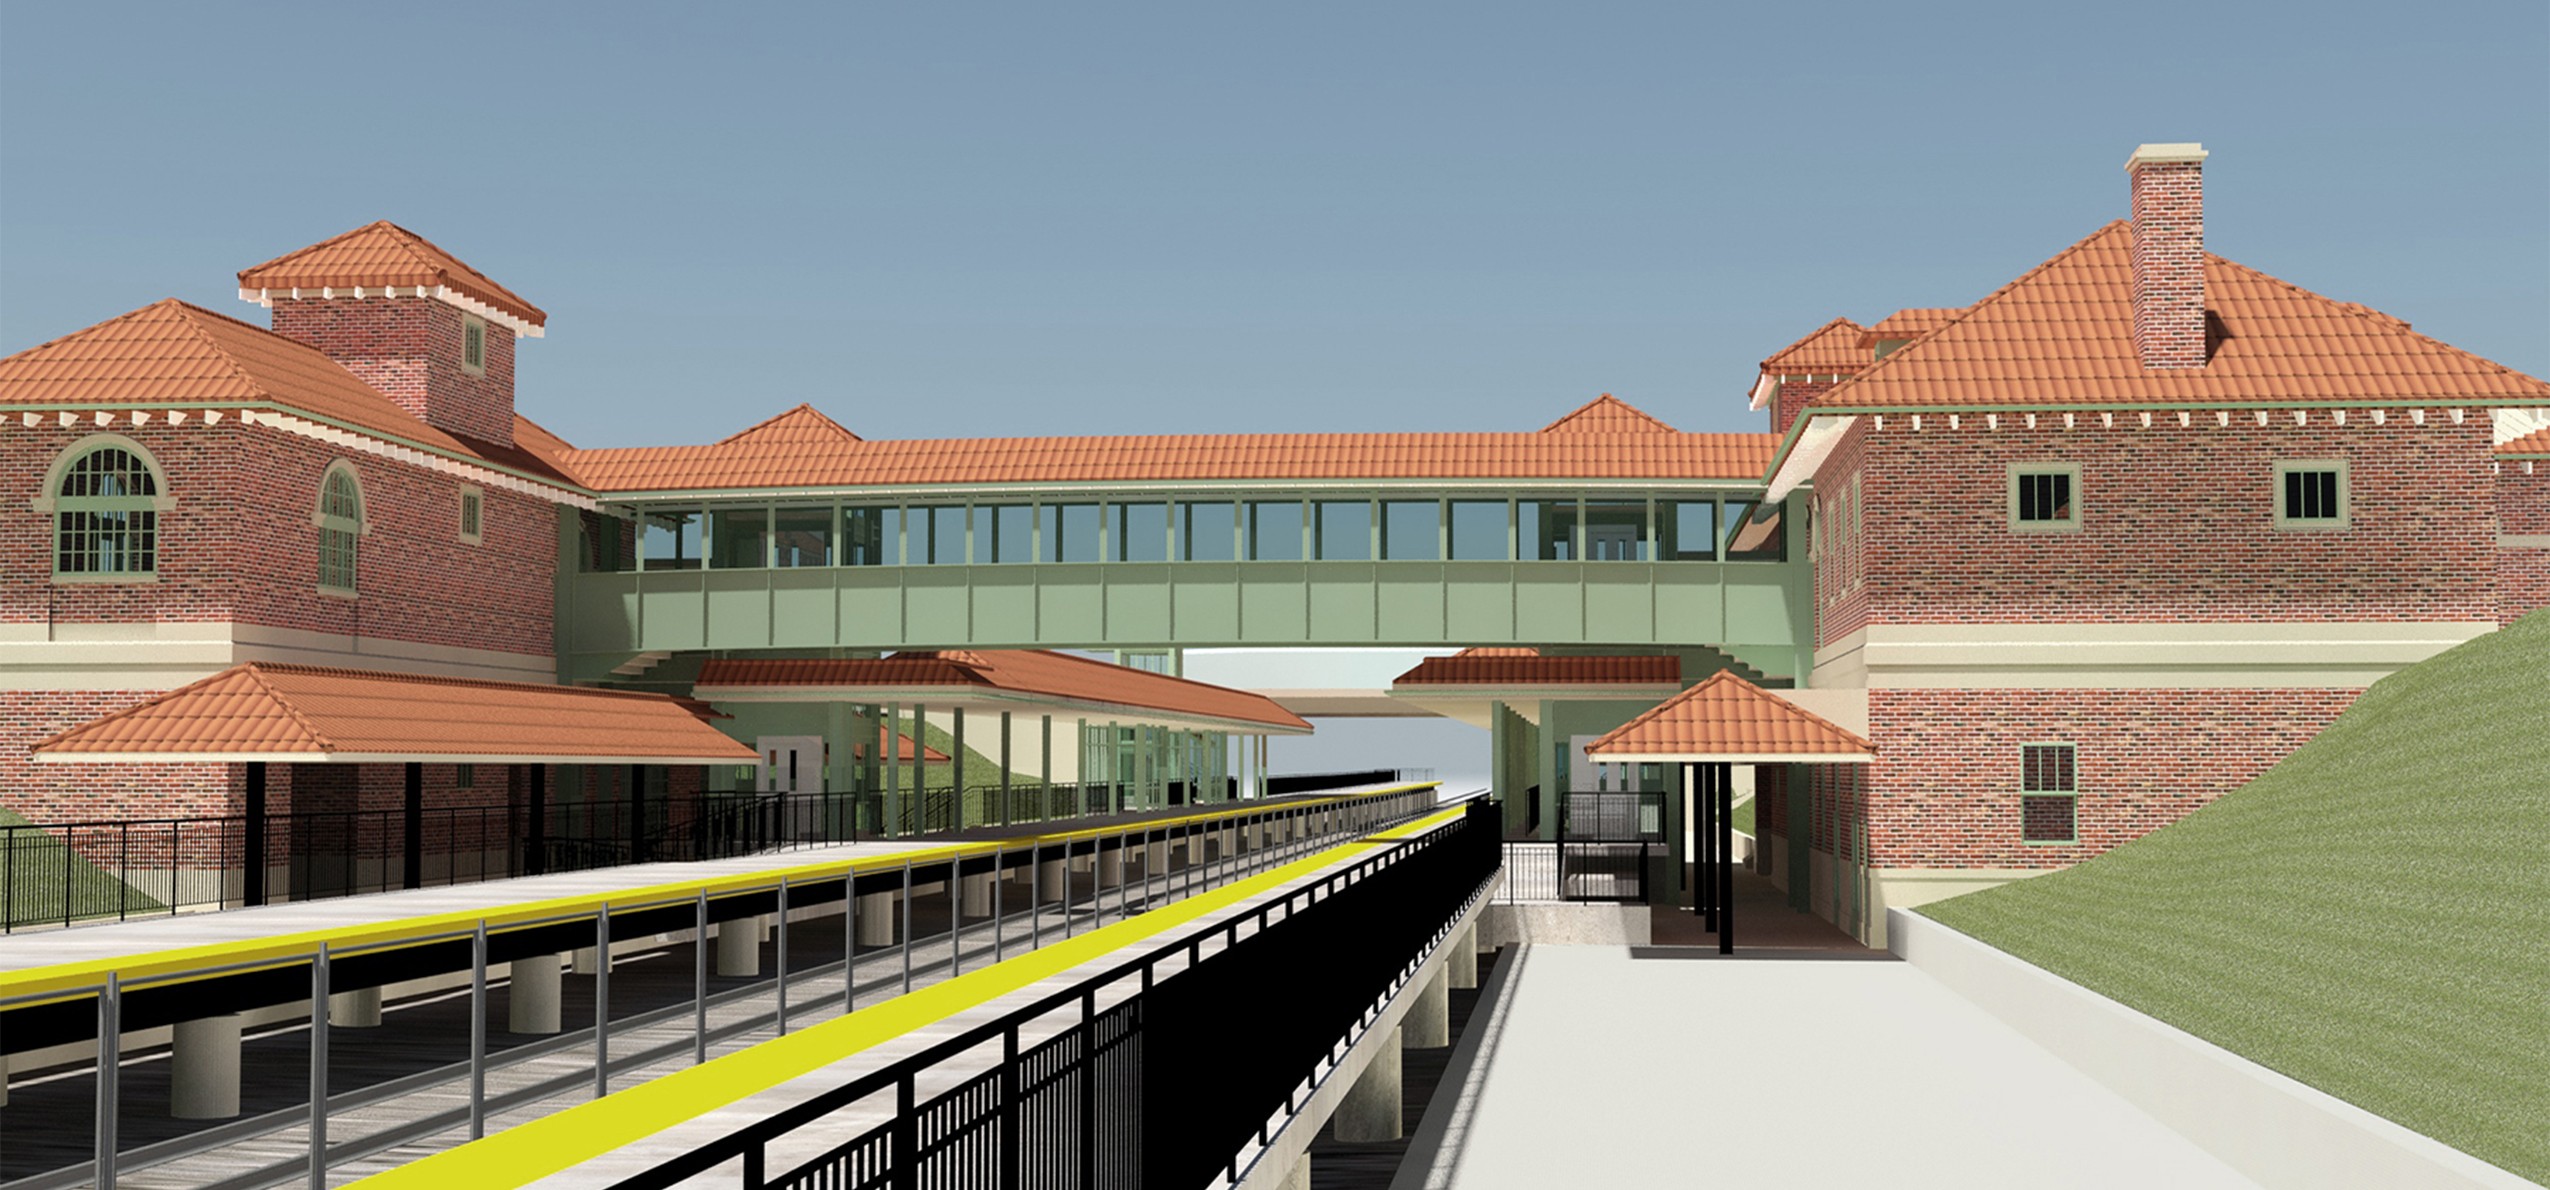 rendering of perth amboy station elevated walkway over track